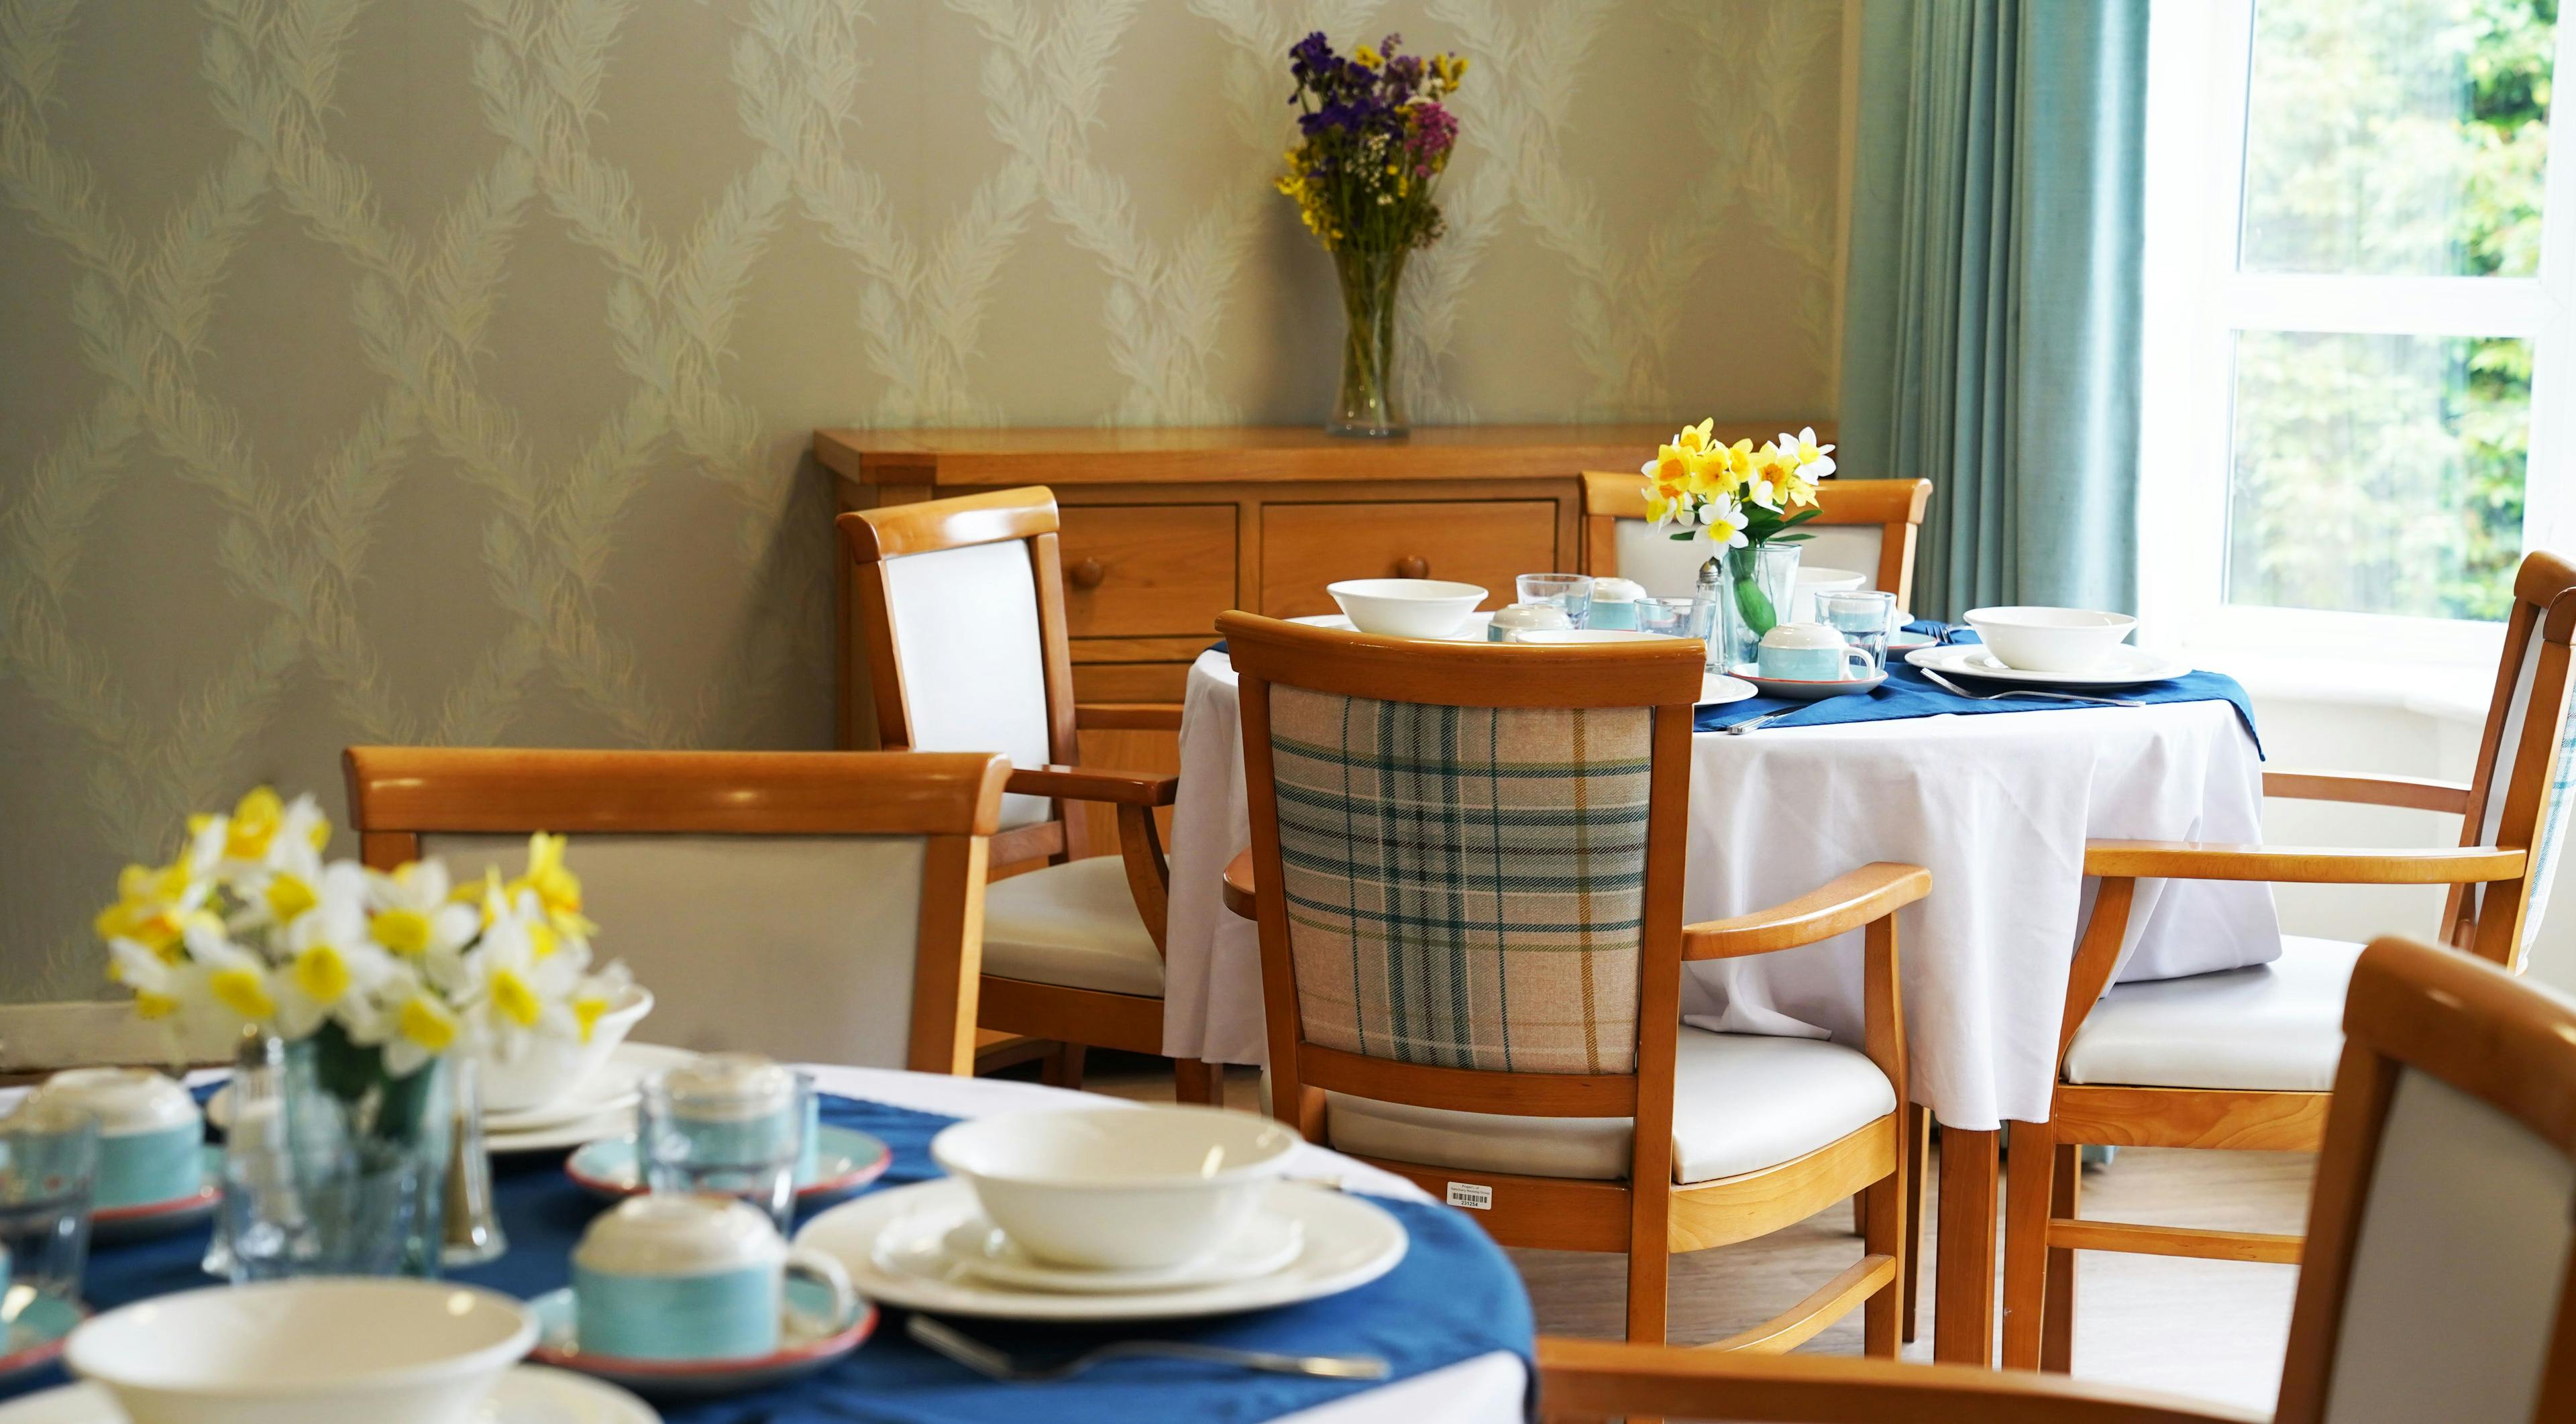 Dining Room at Brambles Court Care Home Redditch, Worcestershire